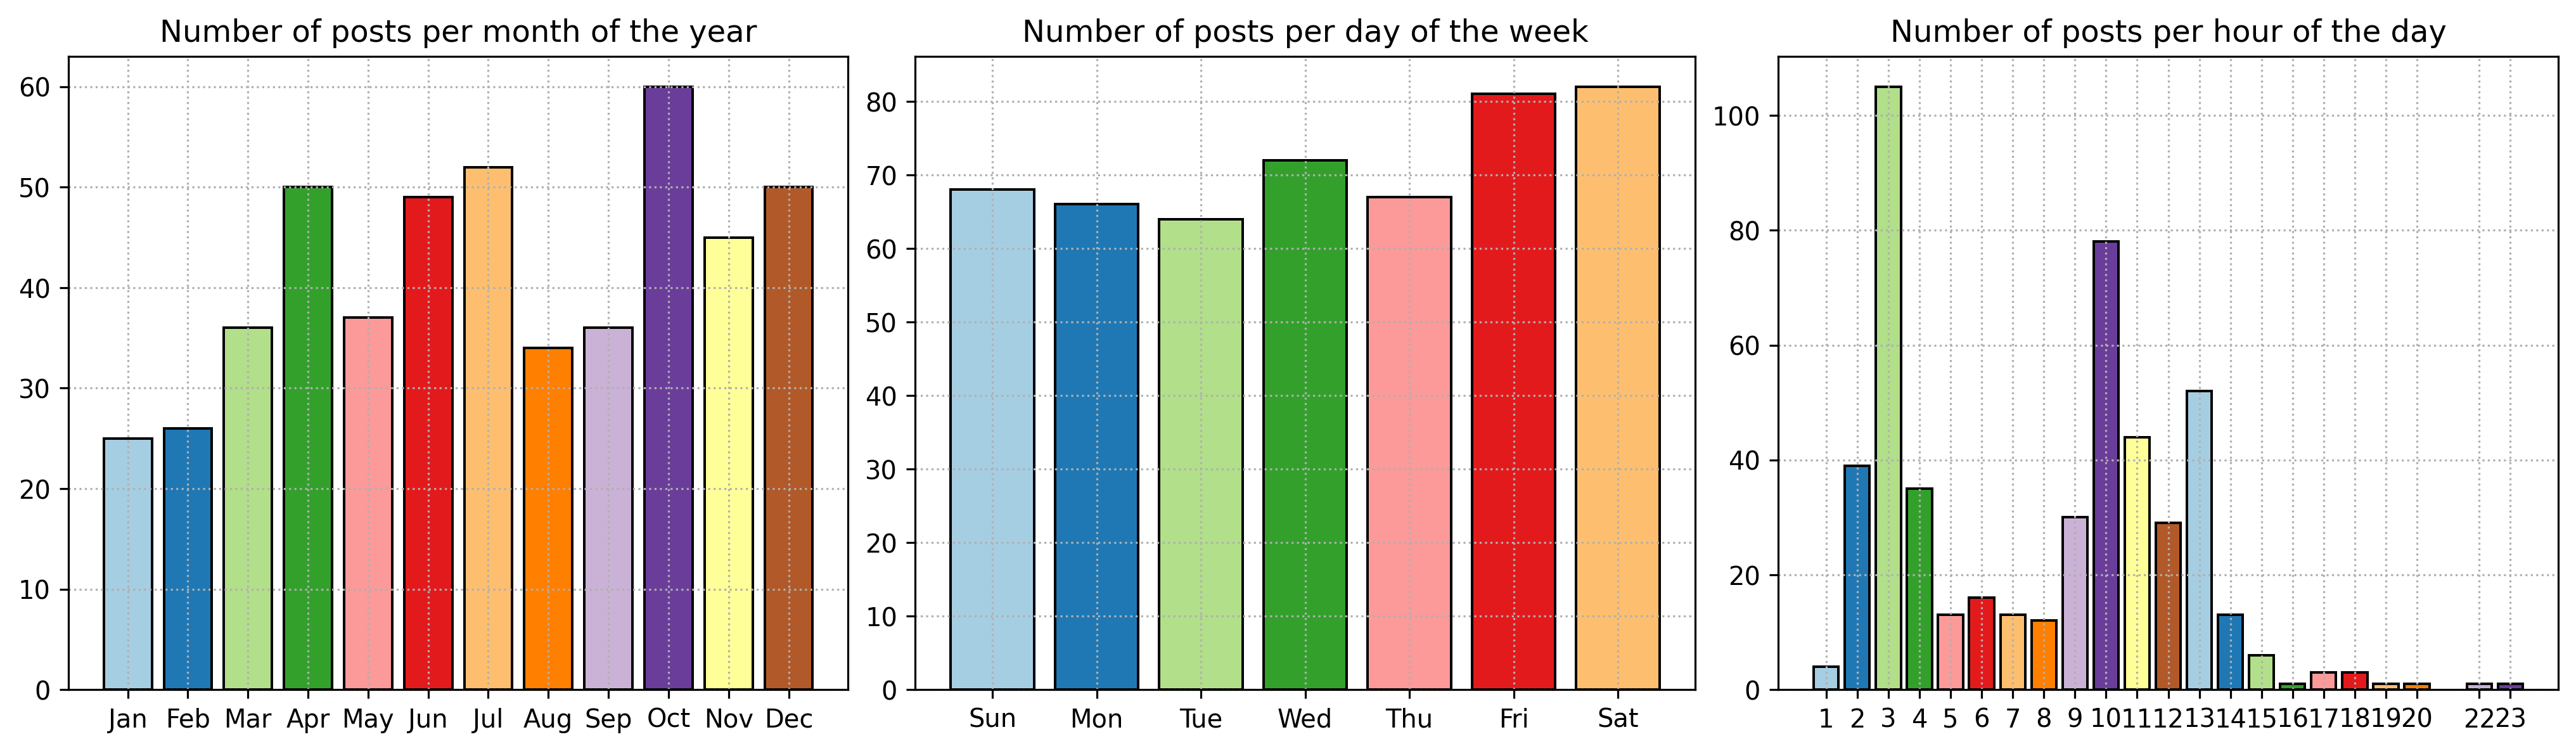 Number of posts per month of the year (left), number of posts per day of the week (center) and number of posts per hour of the day (right)